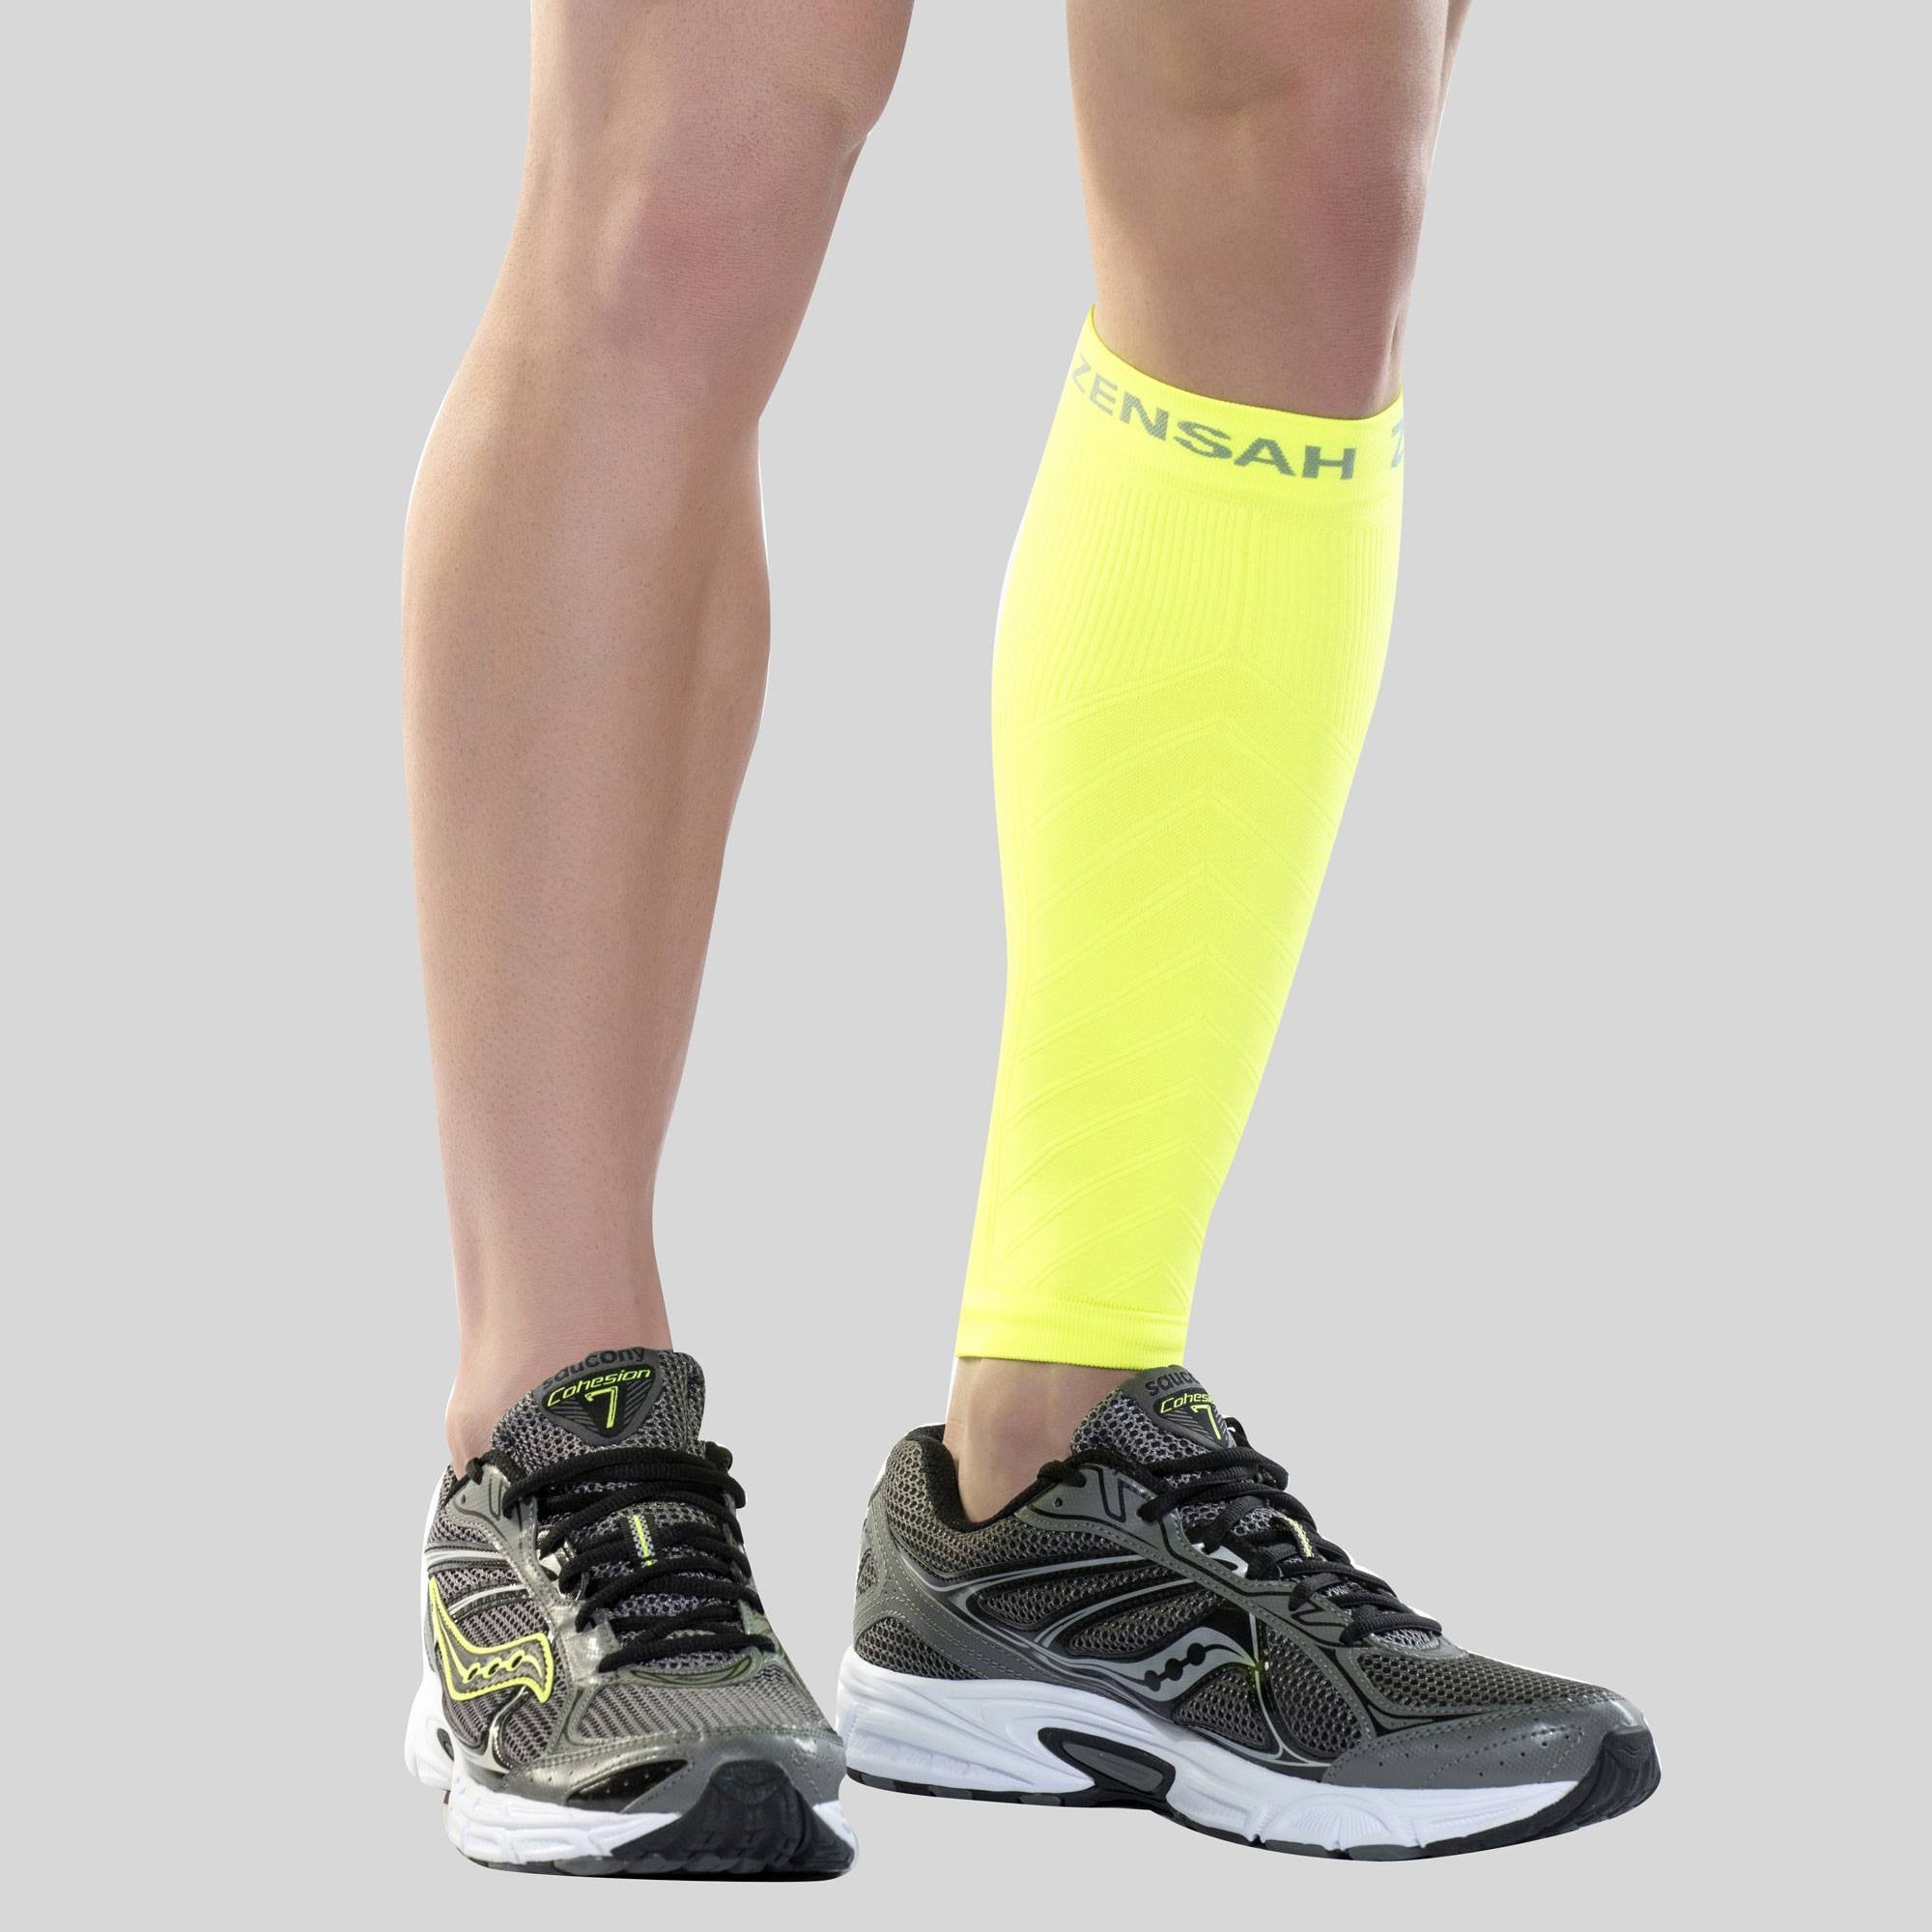 Best Compression Sleeves for Shin Splints from a Specialist